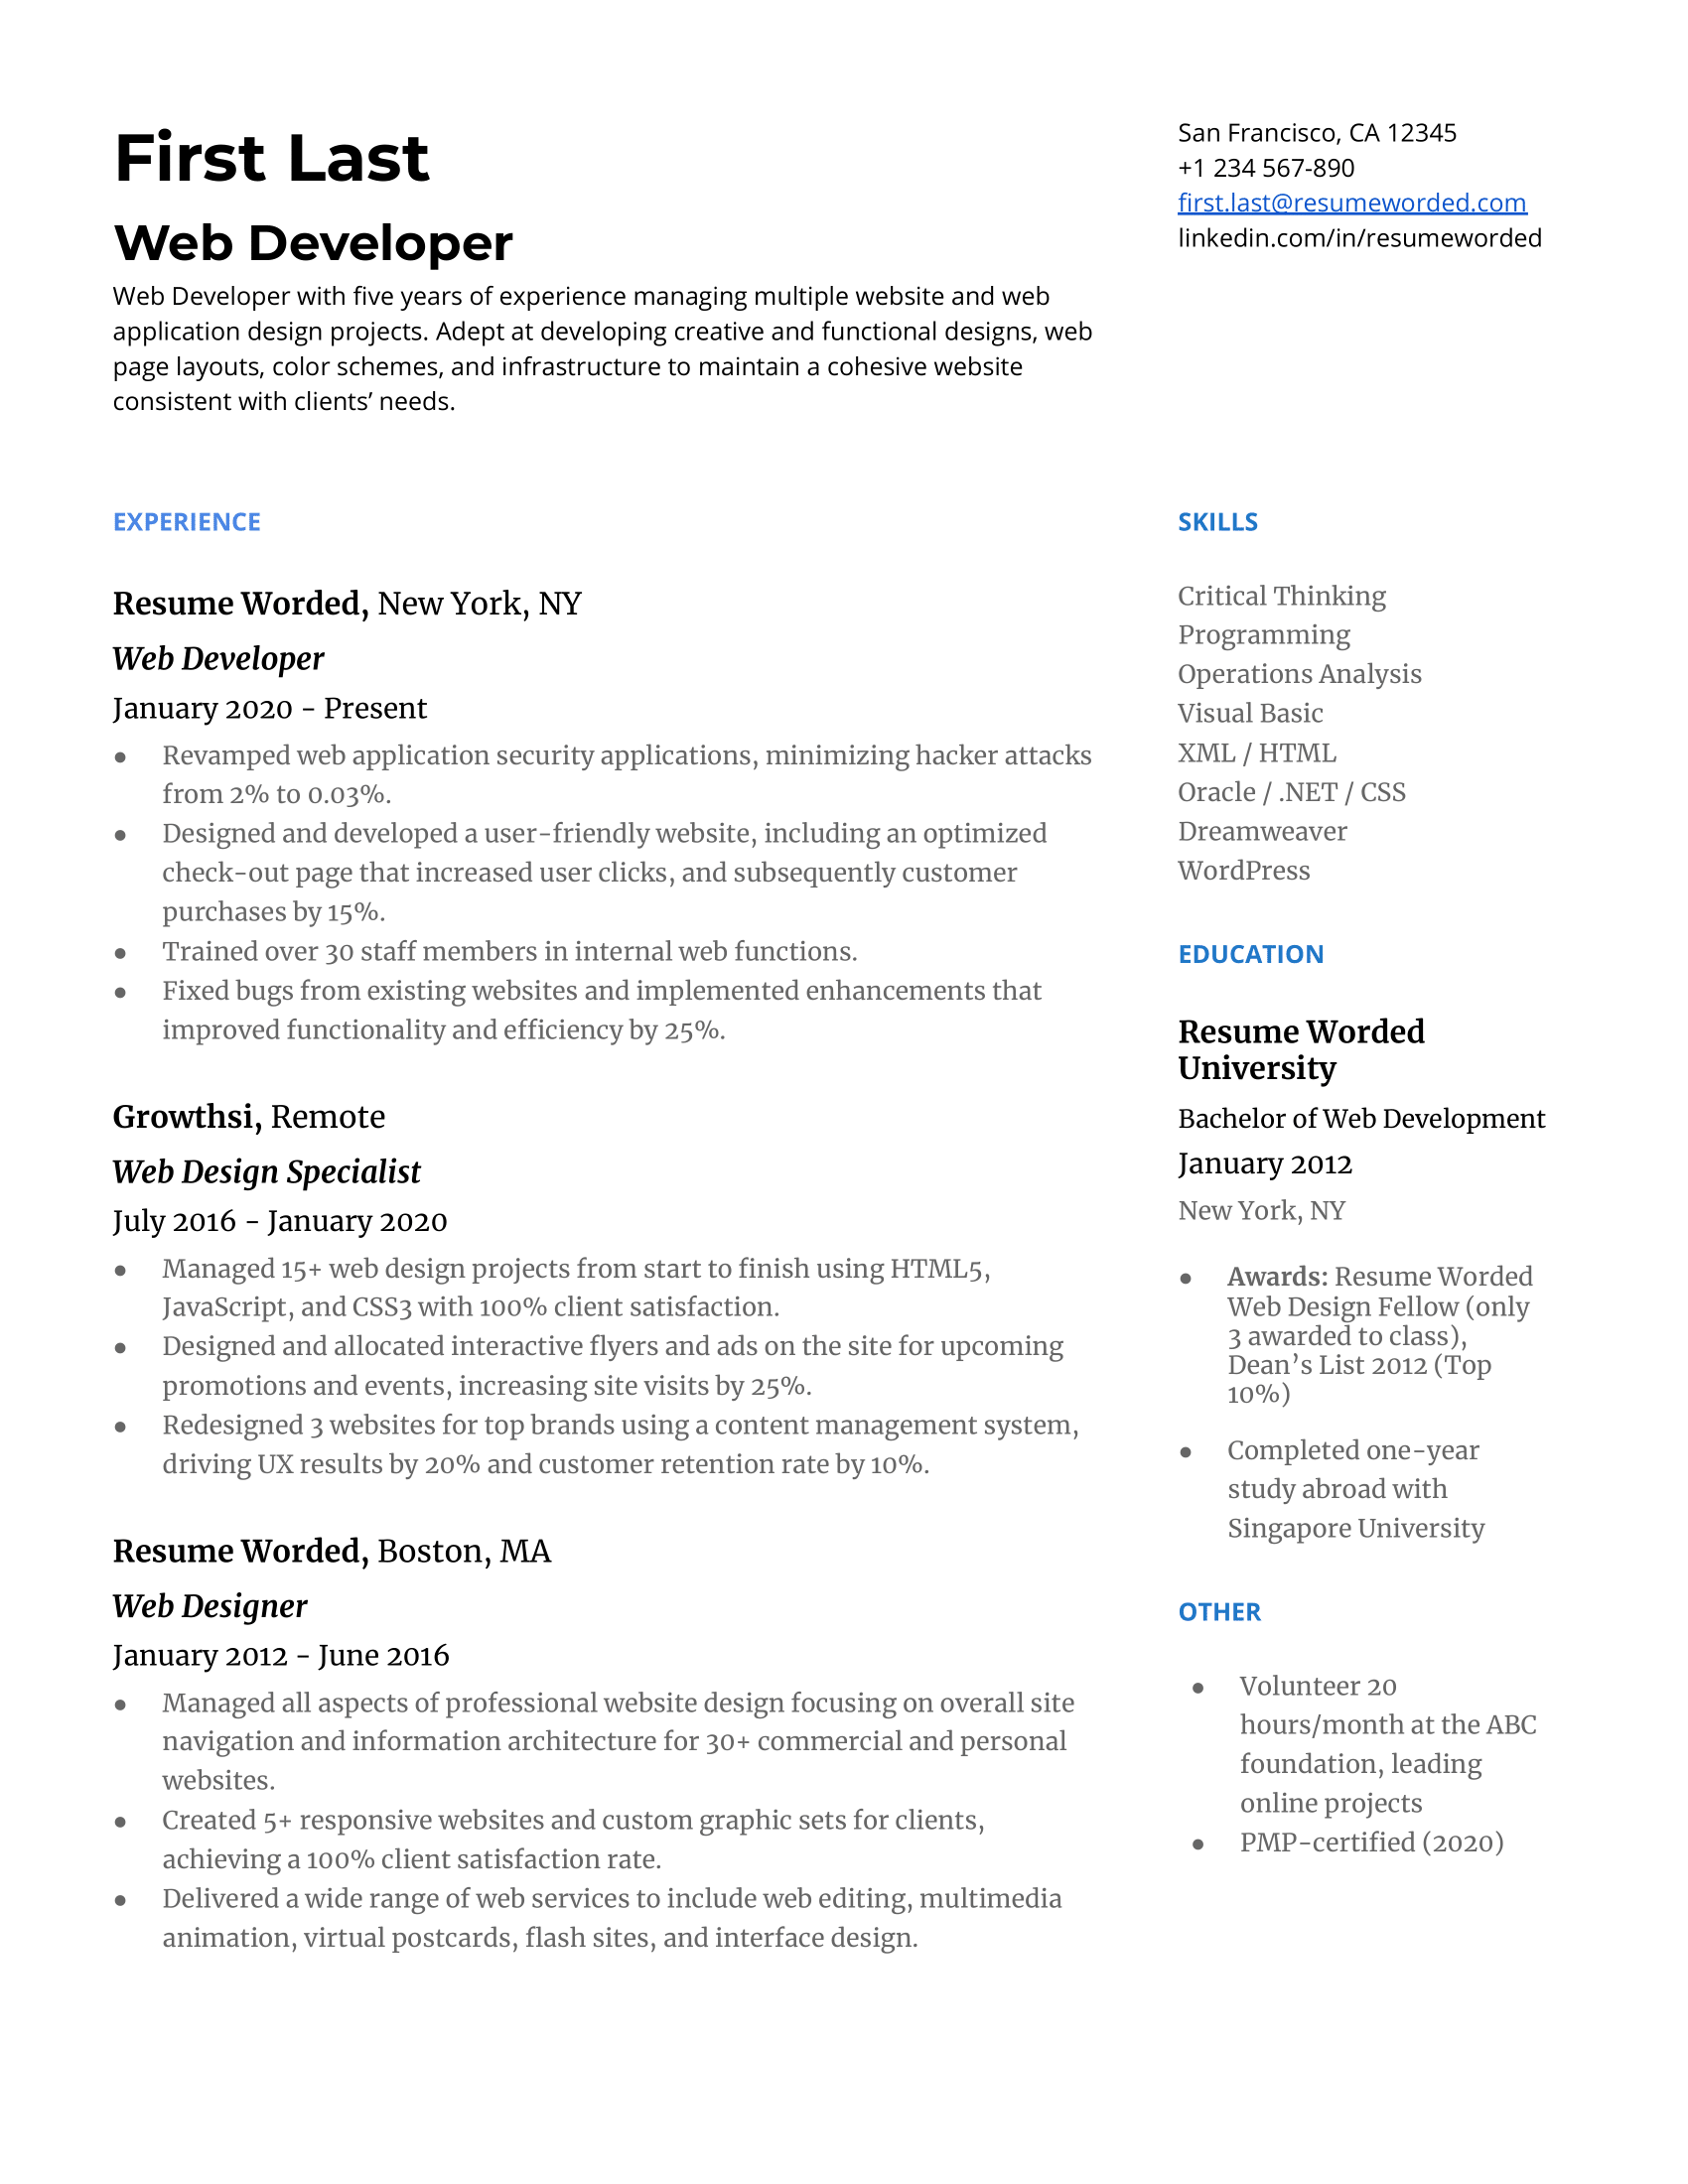 Web developer CV showcasing technical skills and industry trend knowledge.